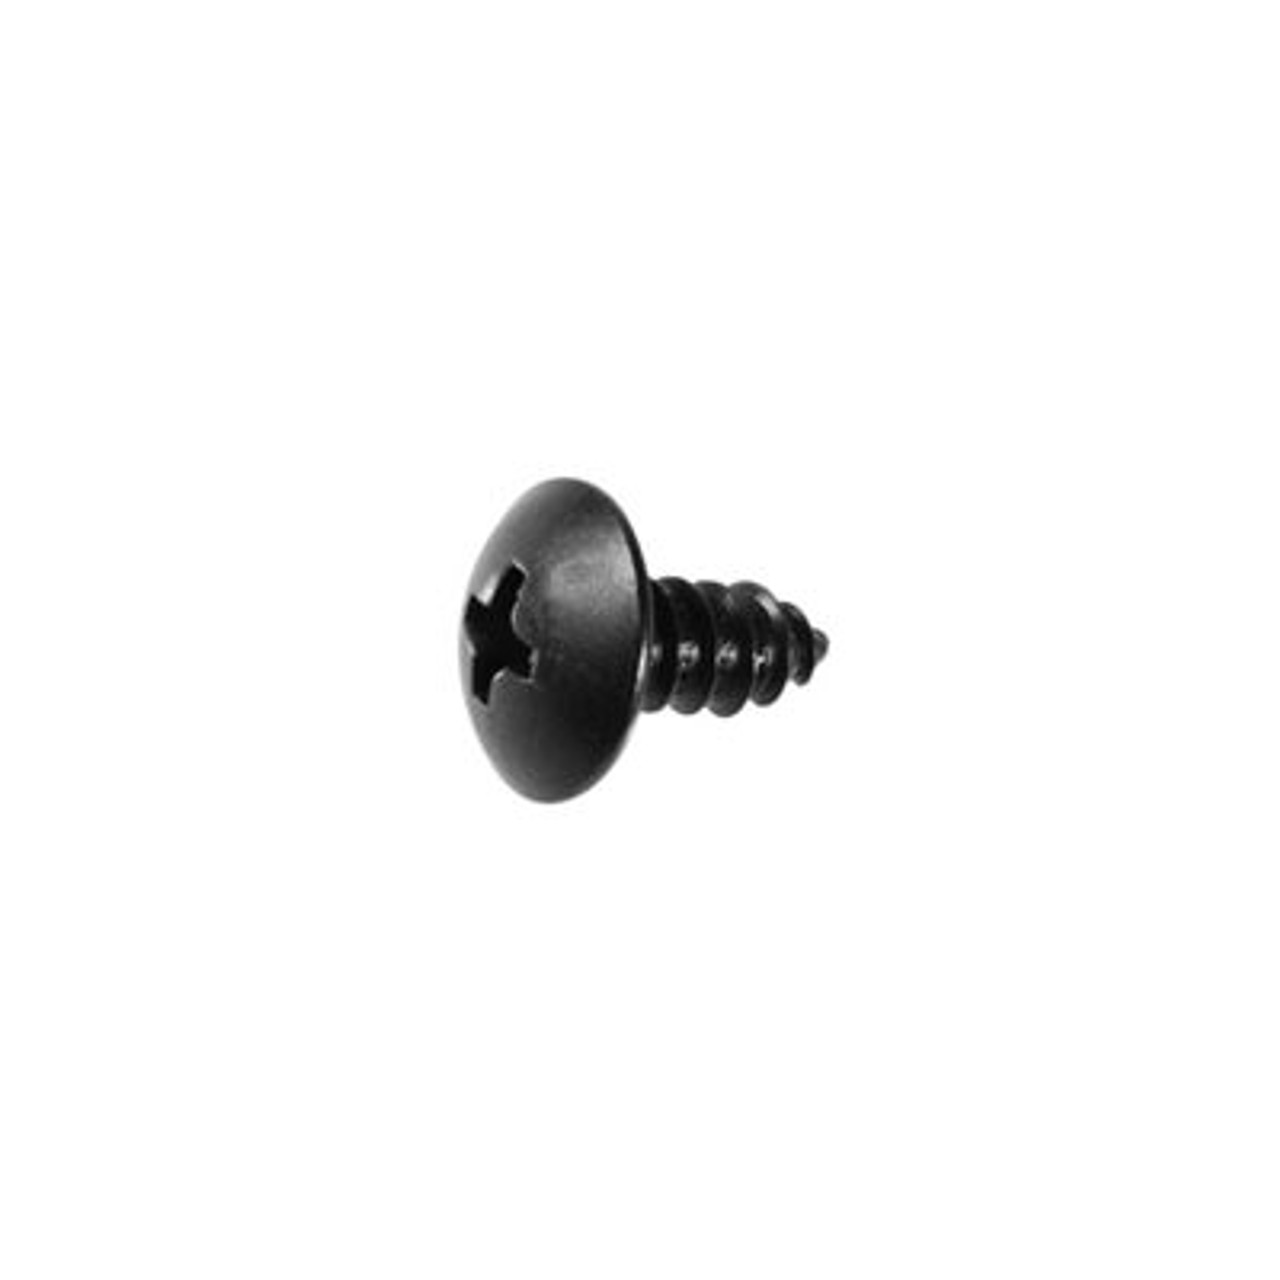 Screw Size : M5-1.59
Length : 11MM
Head Style : Truss
Drive Type : Phillips
Head Diameter : 11MM
Finish : Black Oxide
Used with : Interior Trim
OEM Number : (MF453091)
Pcs/Unit: 50
Country: CN
Catalog Page #: 44